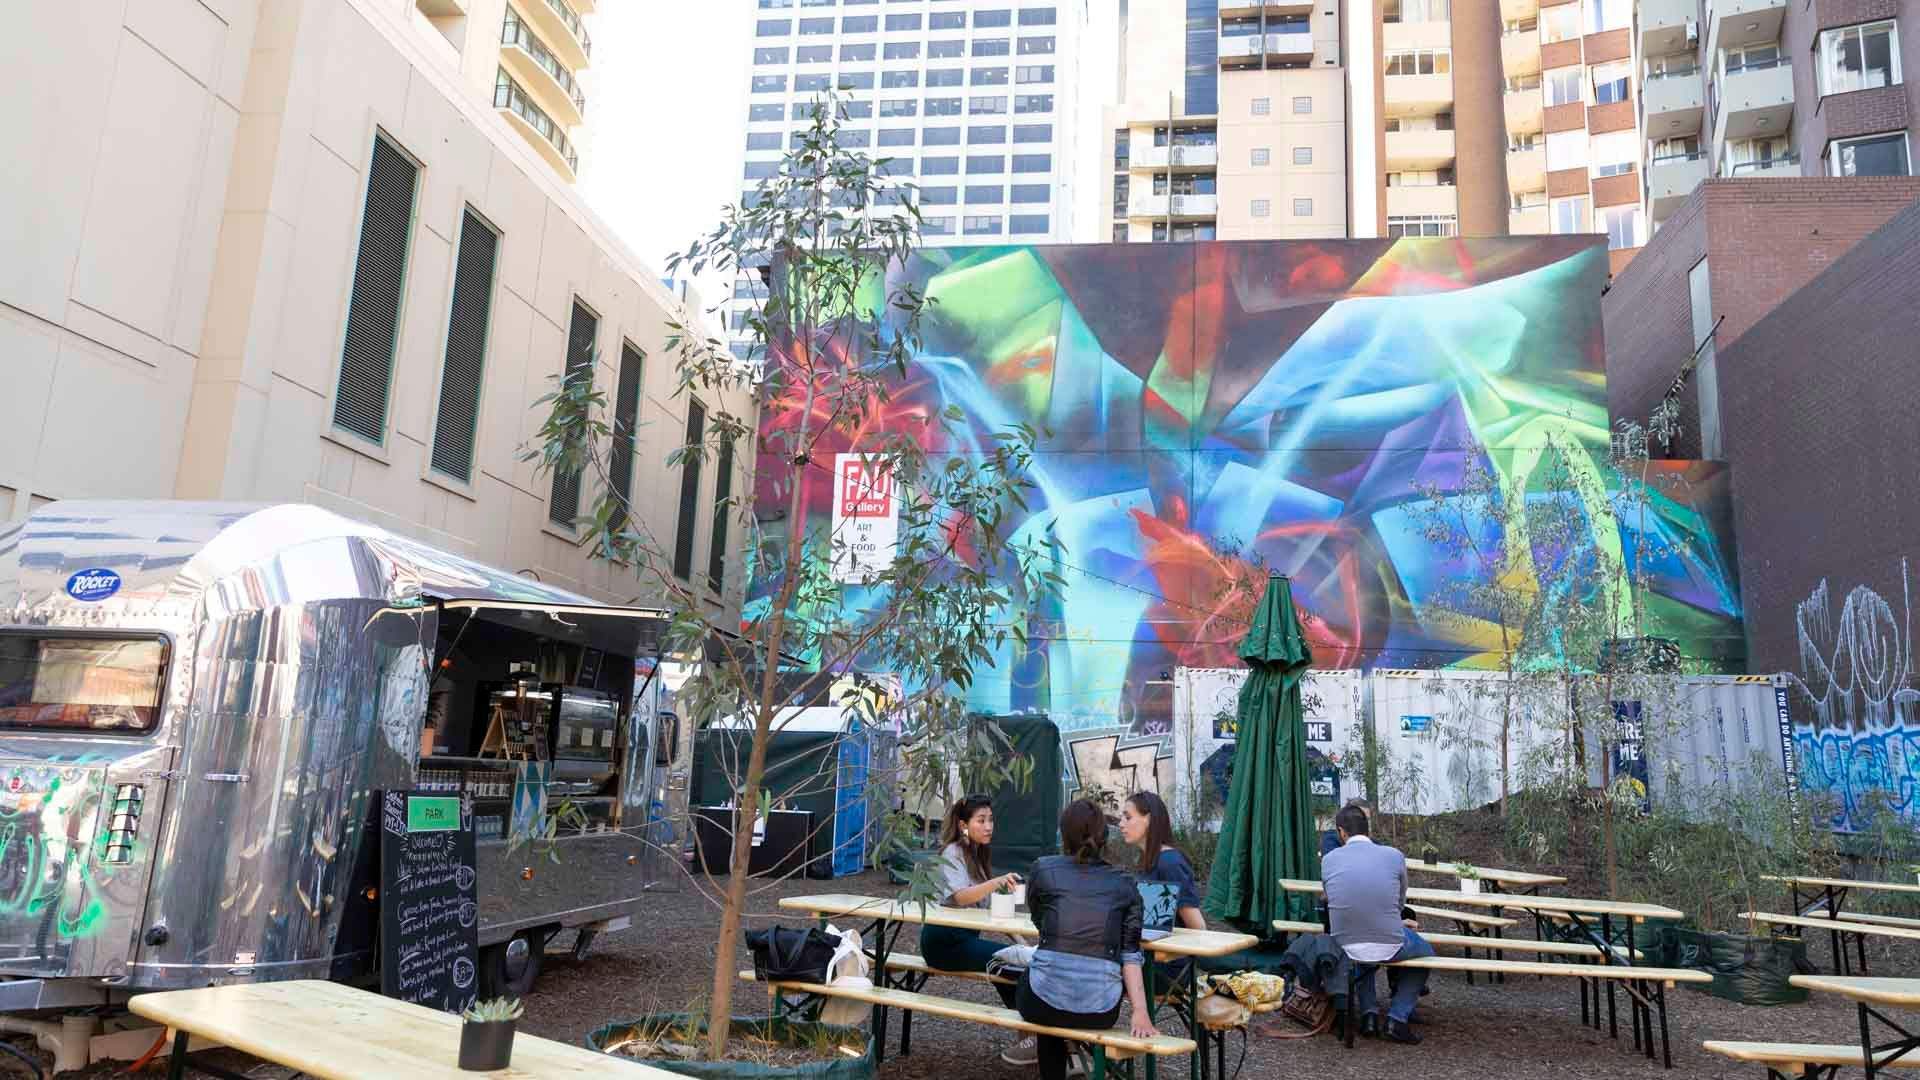 Park Melbourne Is the New Beer Garden and Arts Space in a Former Chinatown Car Park